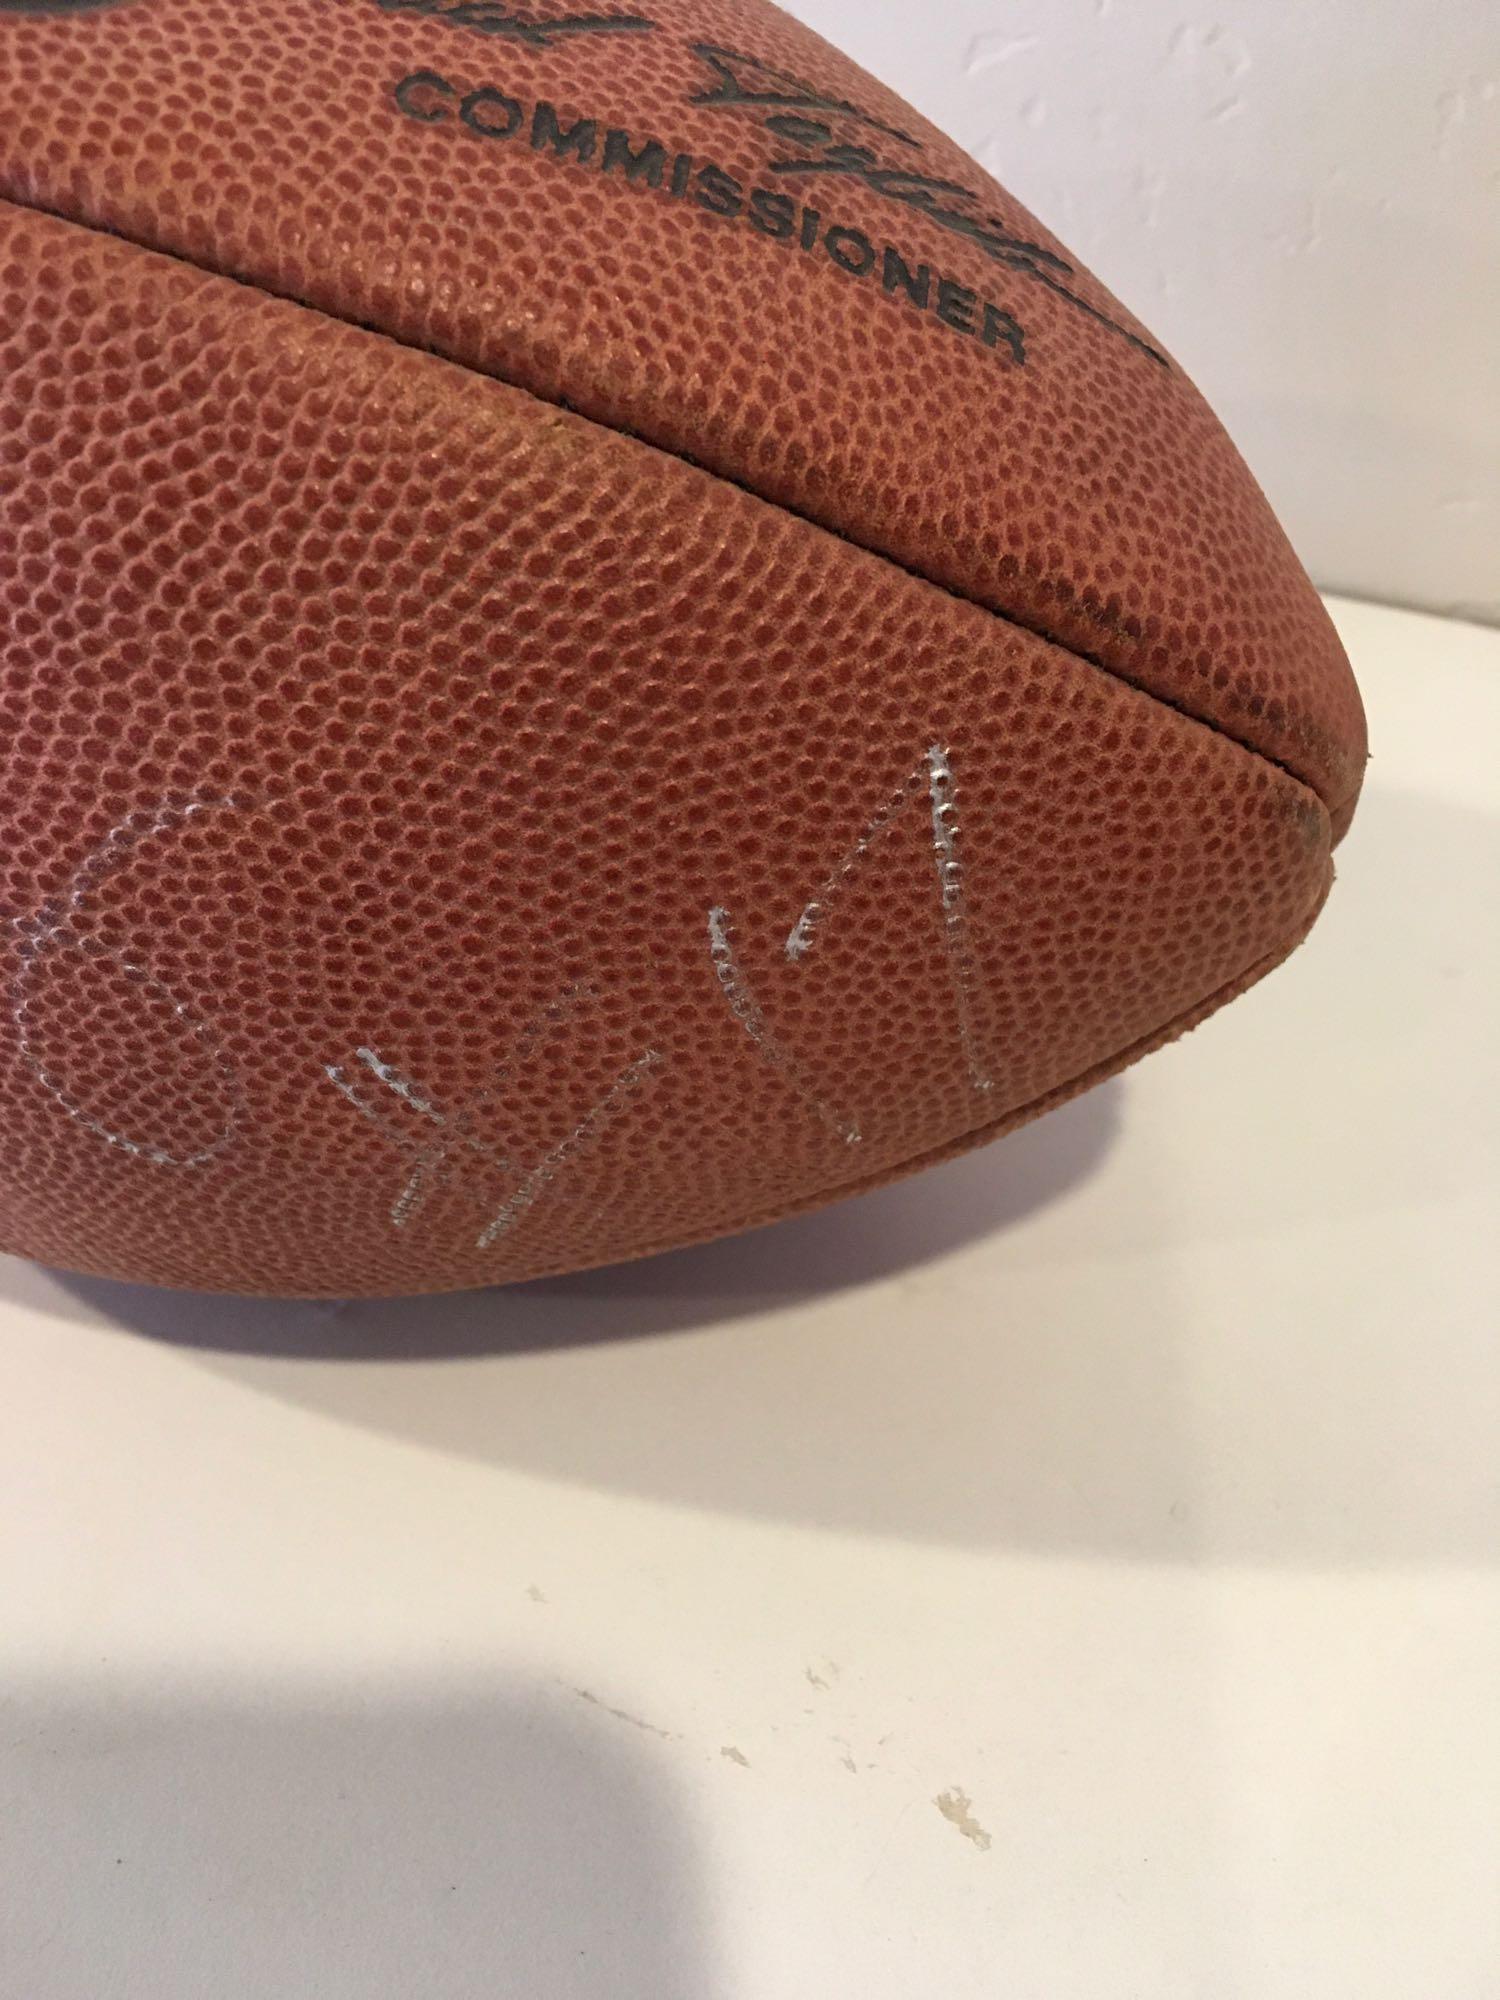 #17 SD Chargers John Friesz signed NFL football